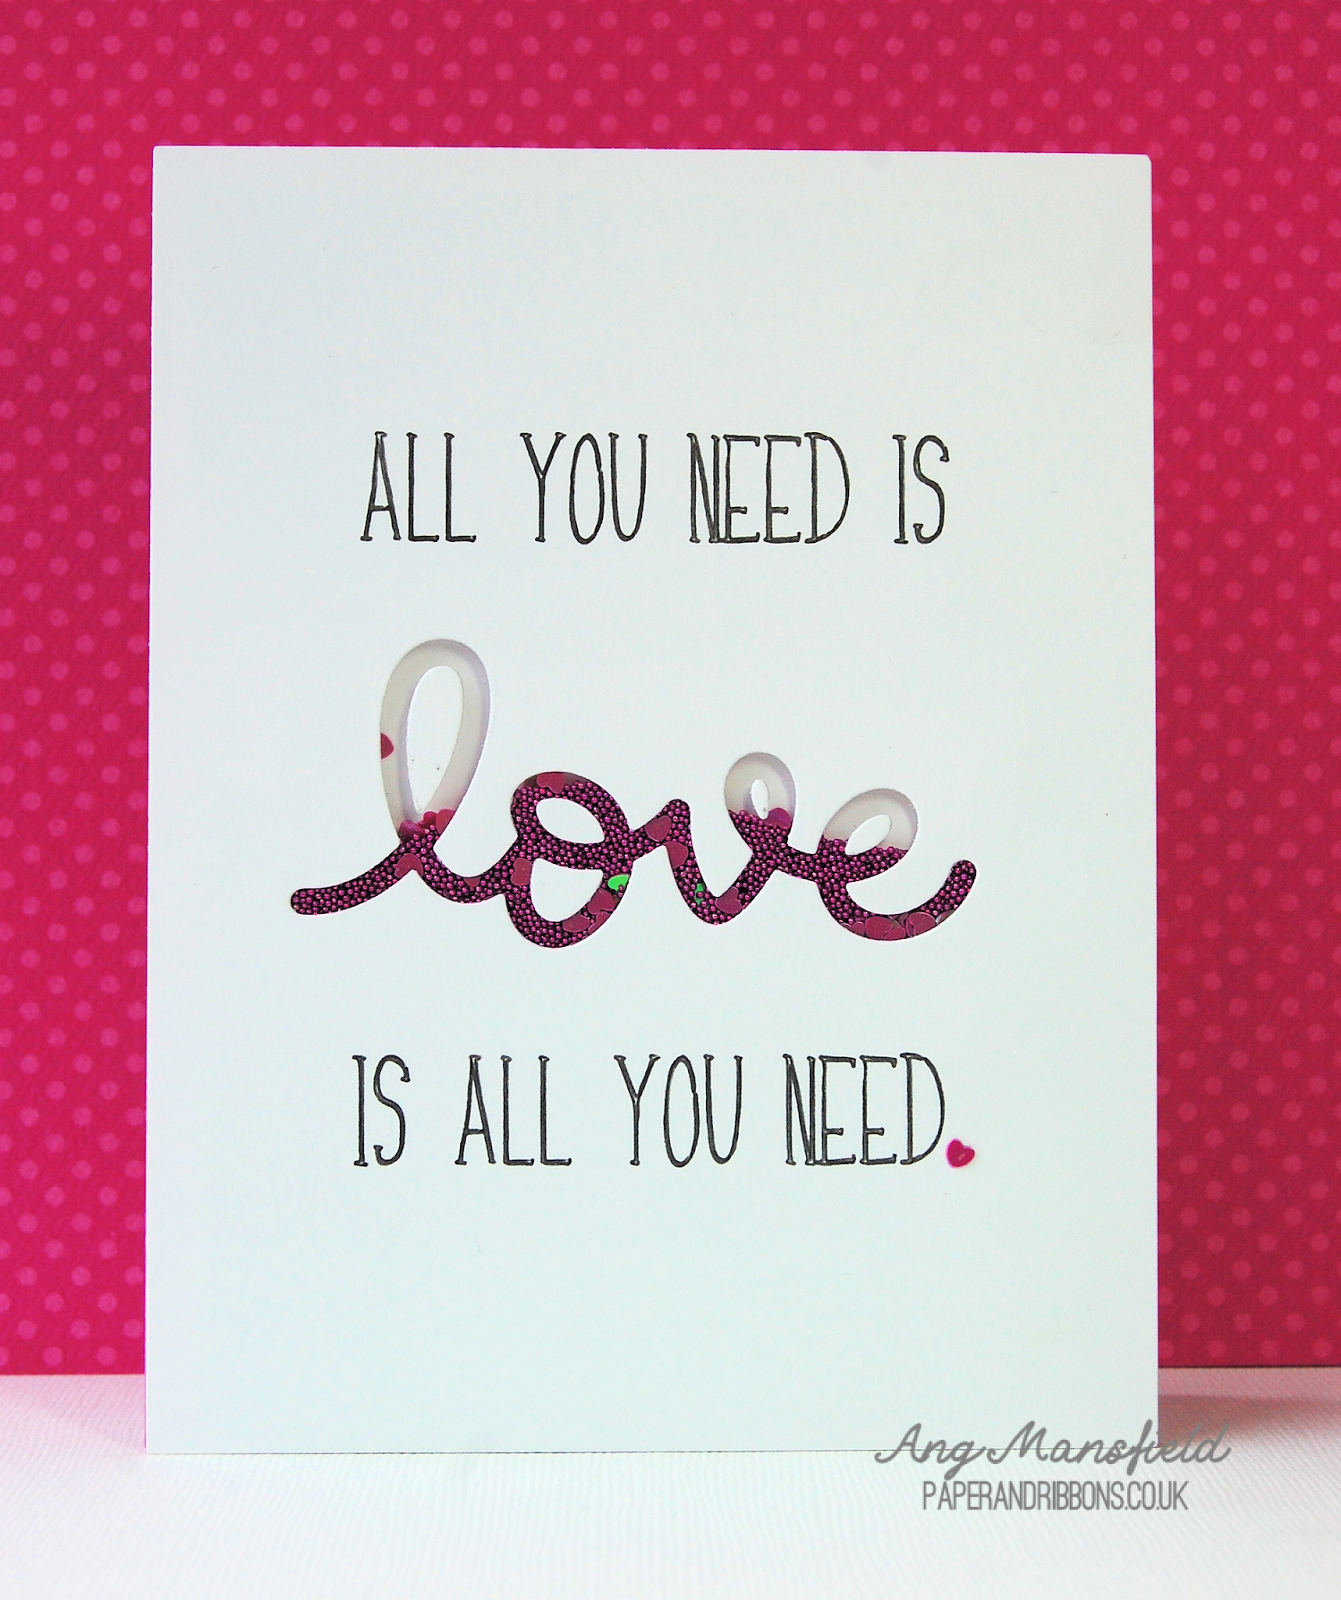 7 more cards for Valentine's Day by Ang Mansfield of Paper and Ribbons